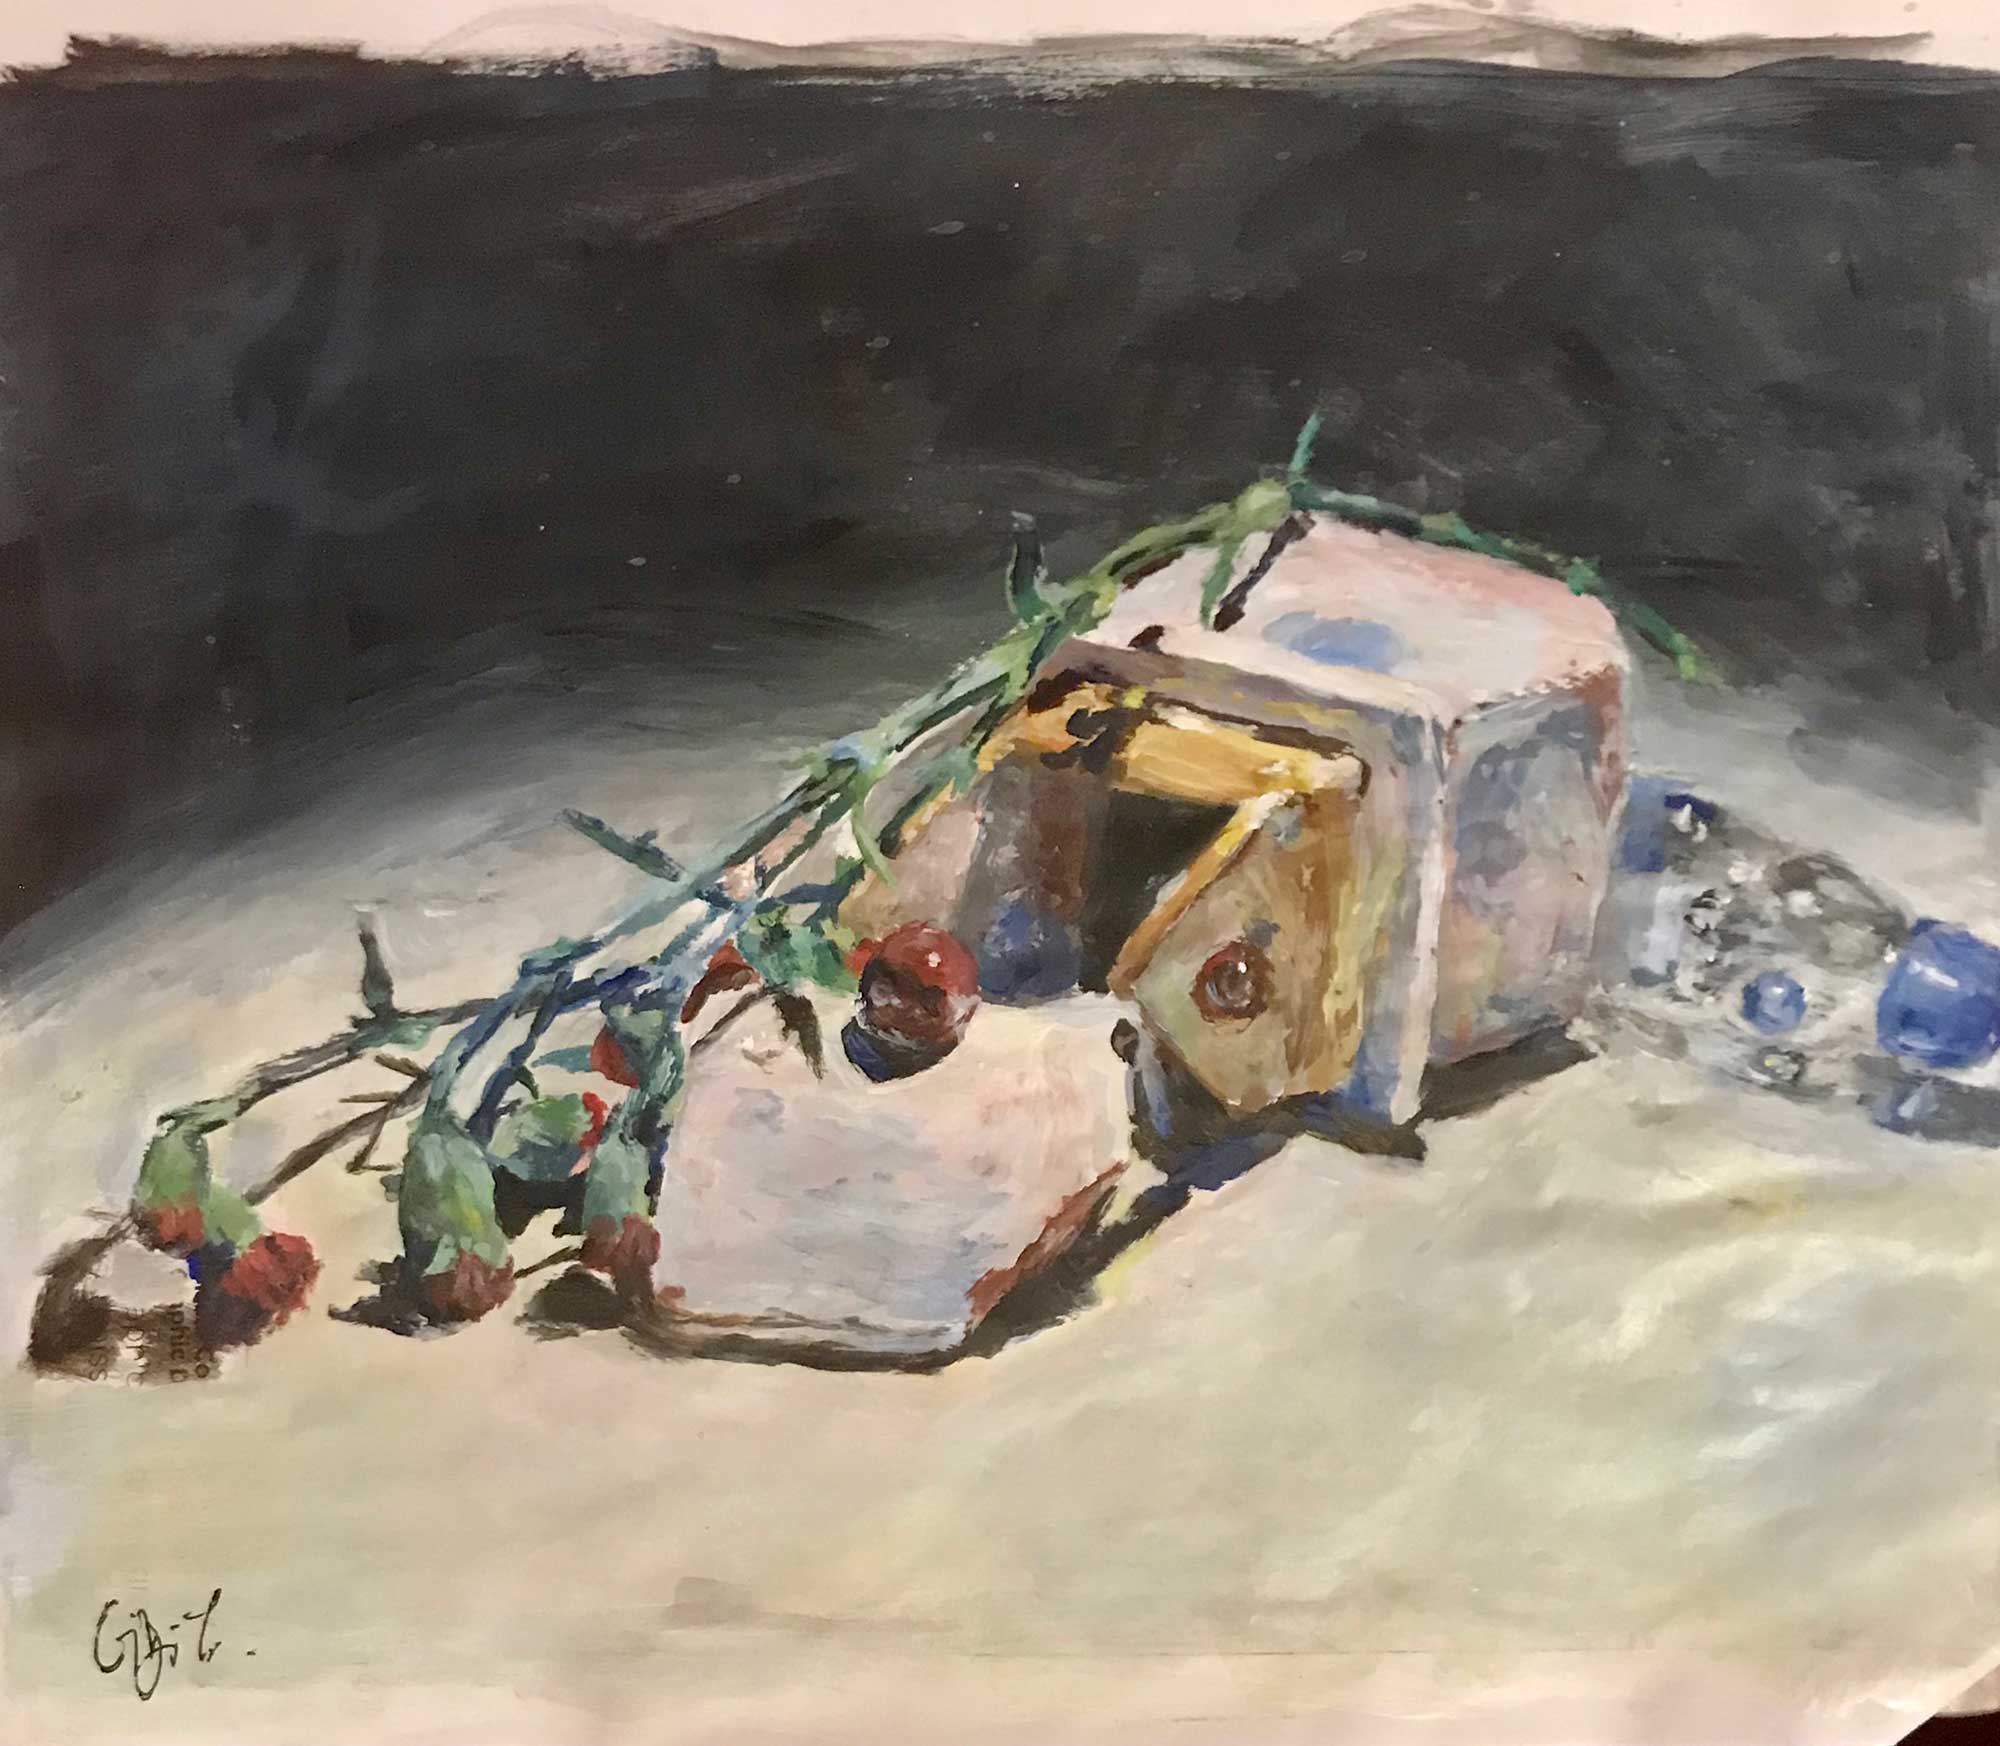 A painting of a fallen object